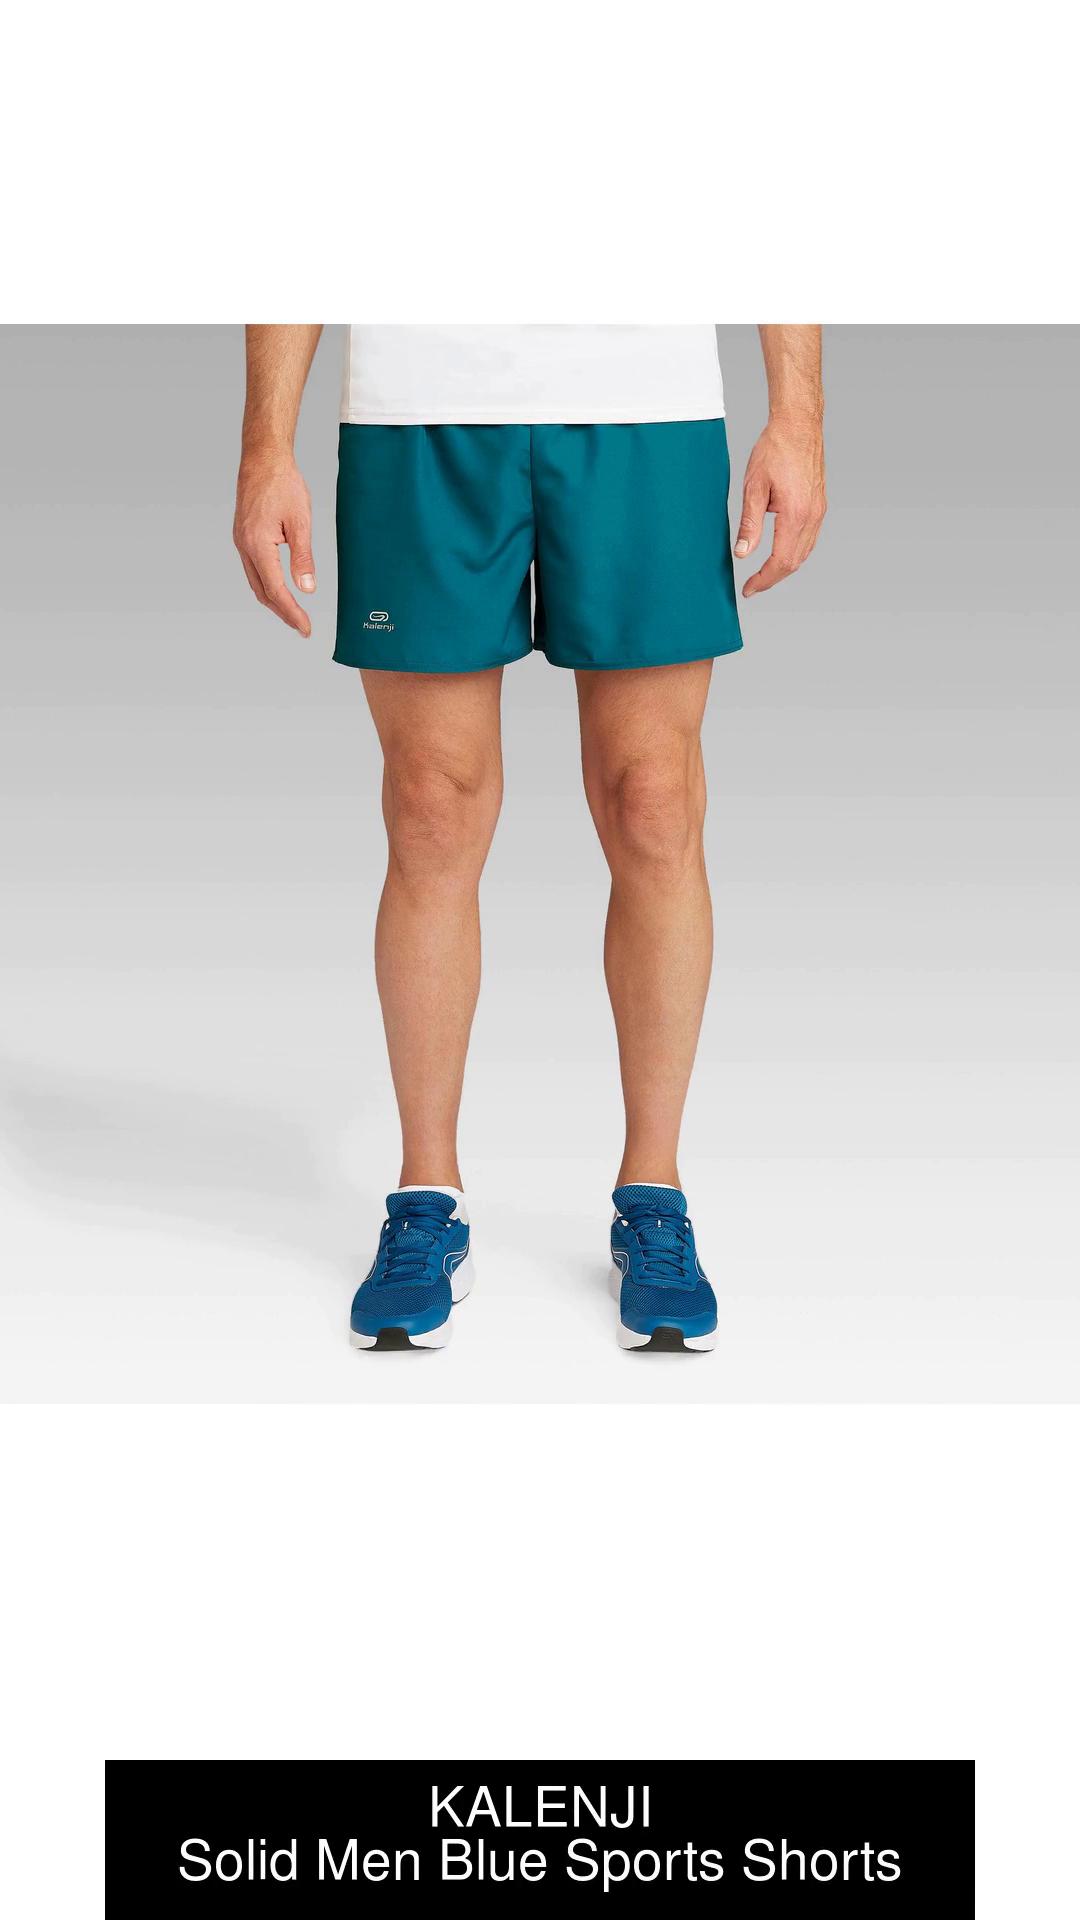 Kalenji Men's Breathable Running Boxers in Petrol Blue, Size Small